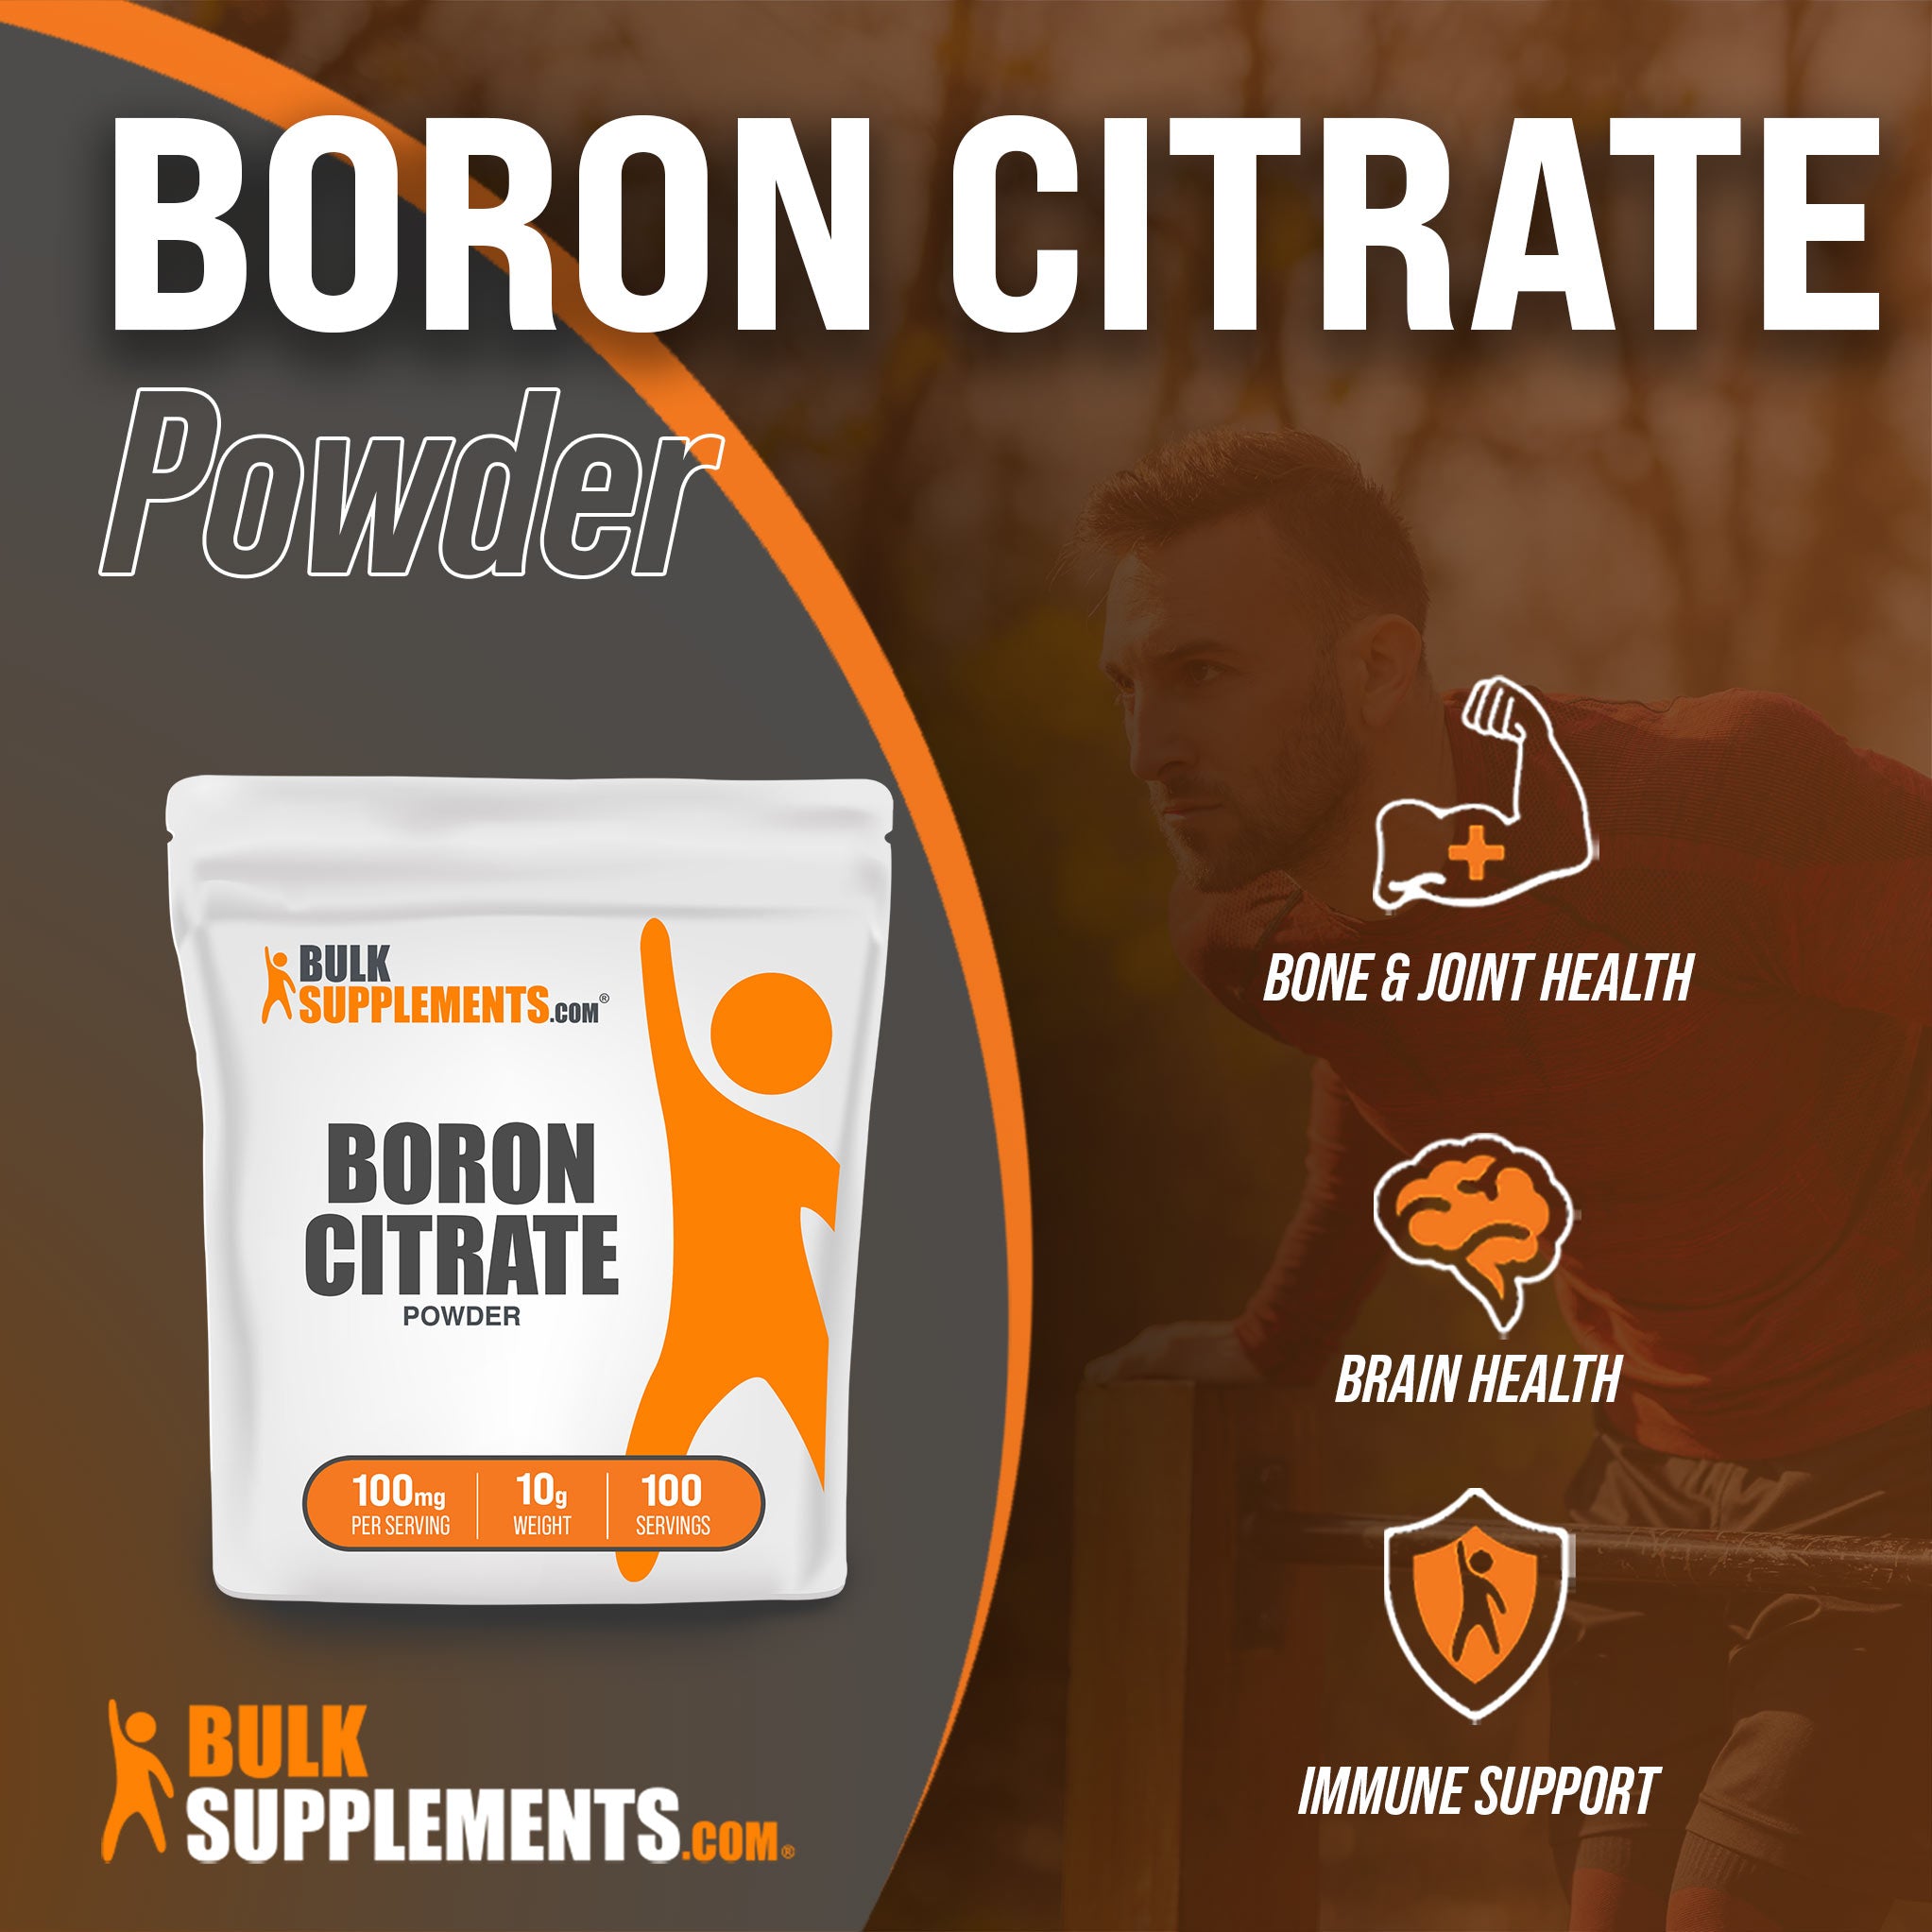 10g of Boron Citrate: 100mg Servings